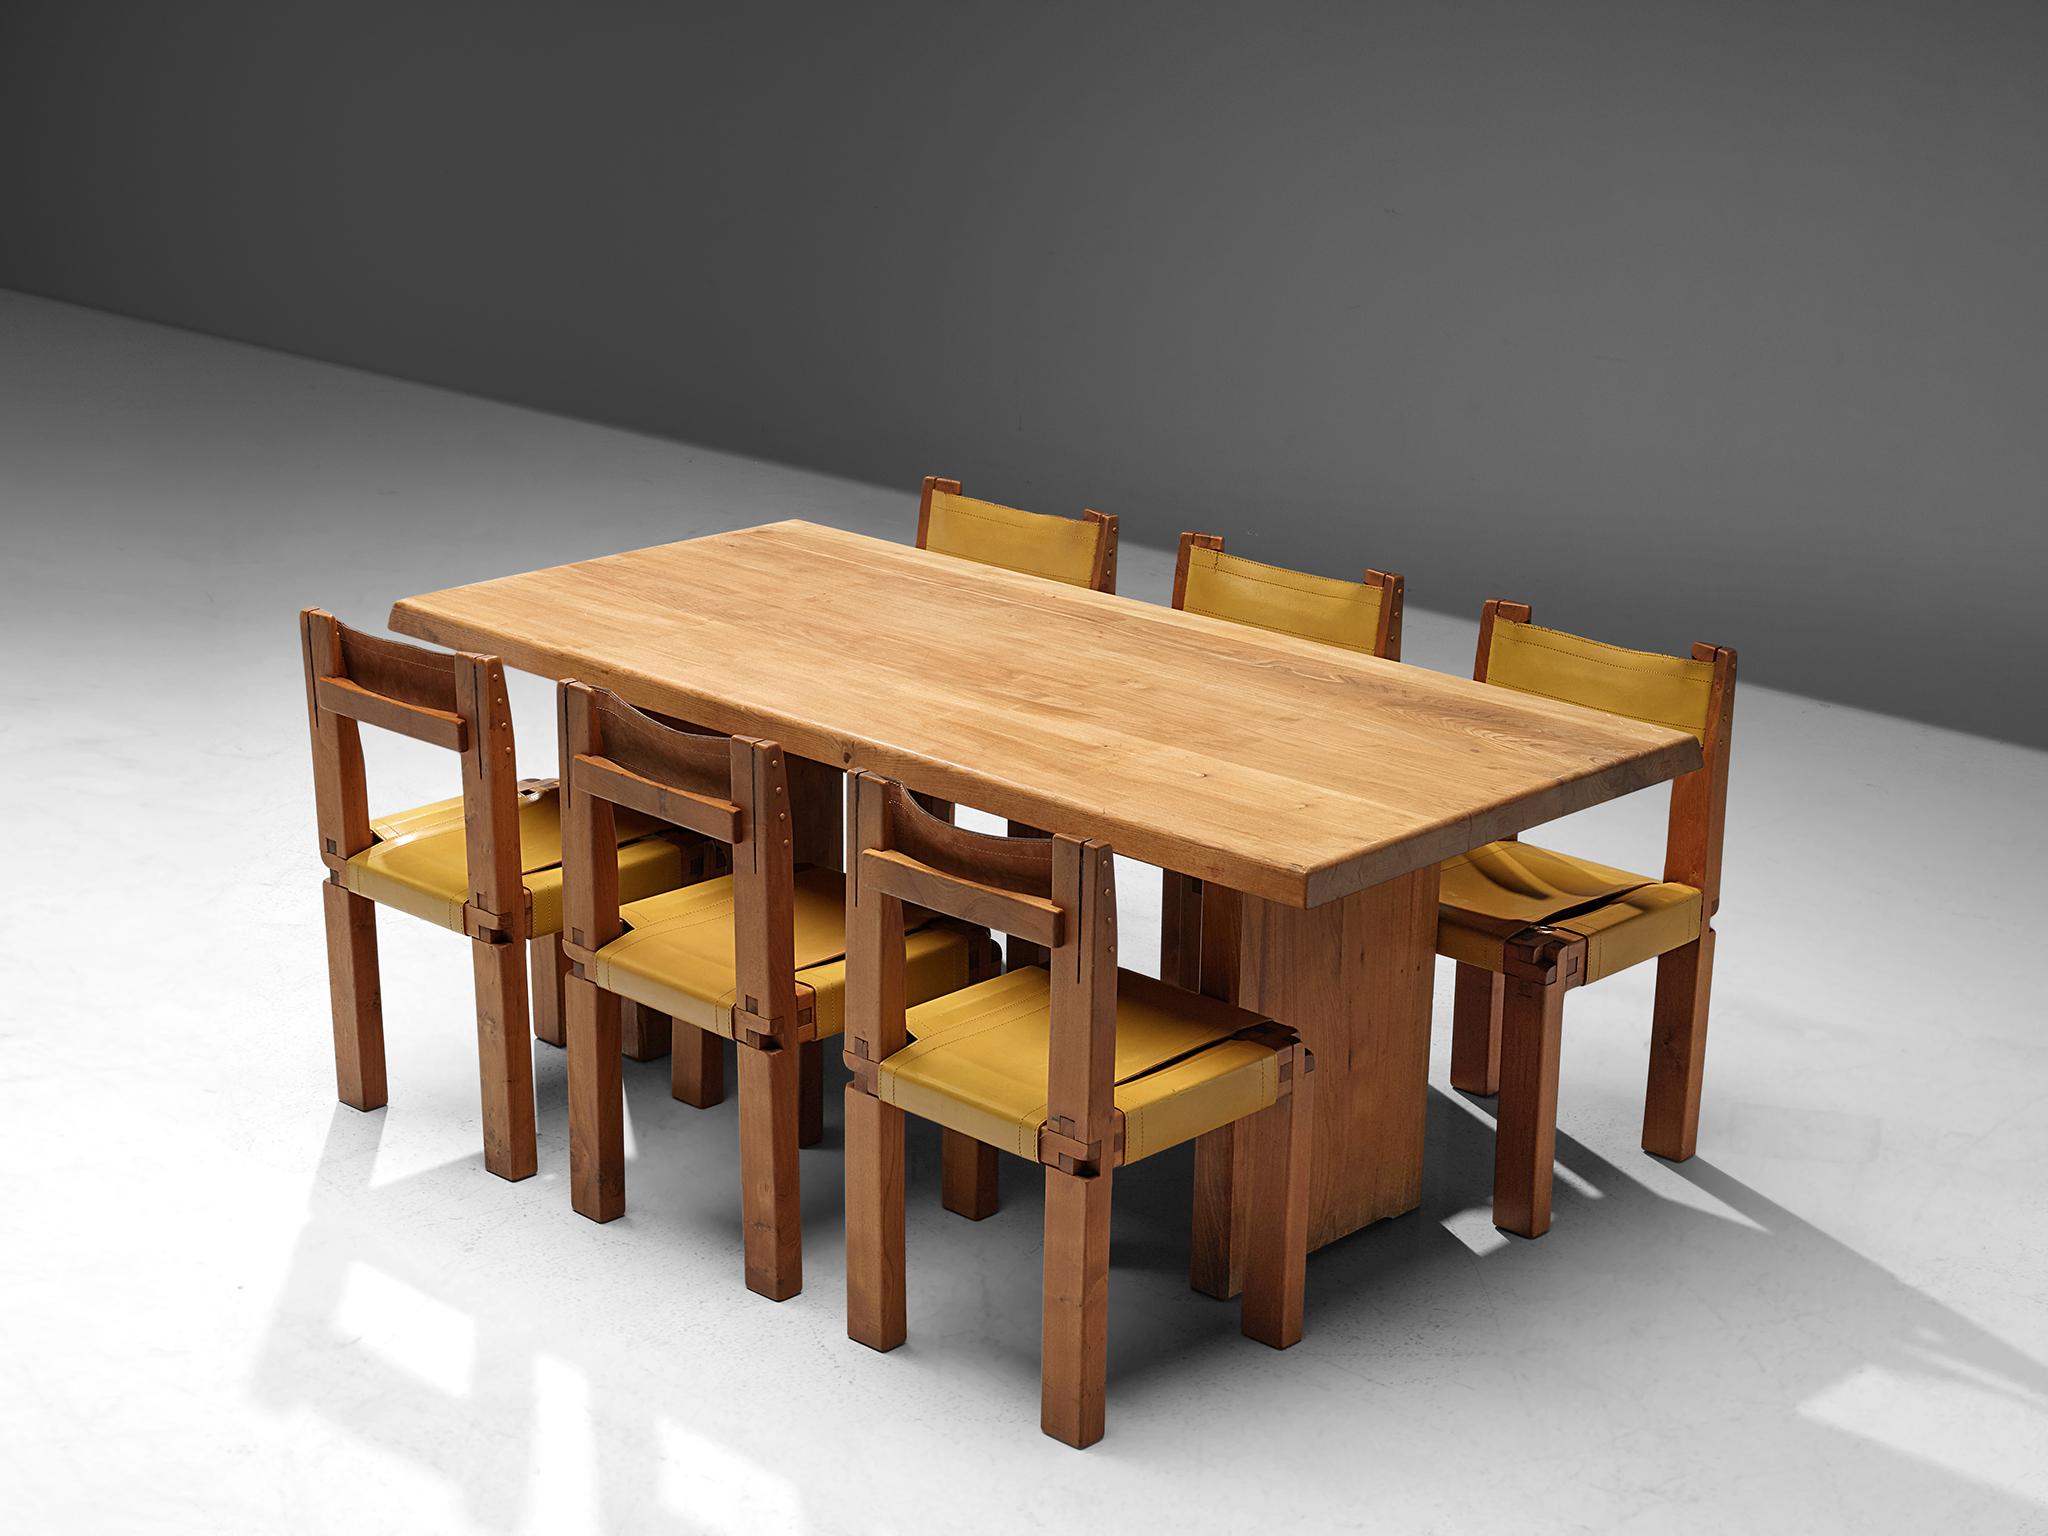 Pierre Chapo, dining table model T14C in elm, and set of six dining chairs model S11 in elm and yellow leather, France, 1960s.

A beautiful dining room set by the French designer Pierre Chapo. 
The dining table has a strong and simplified design